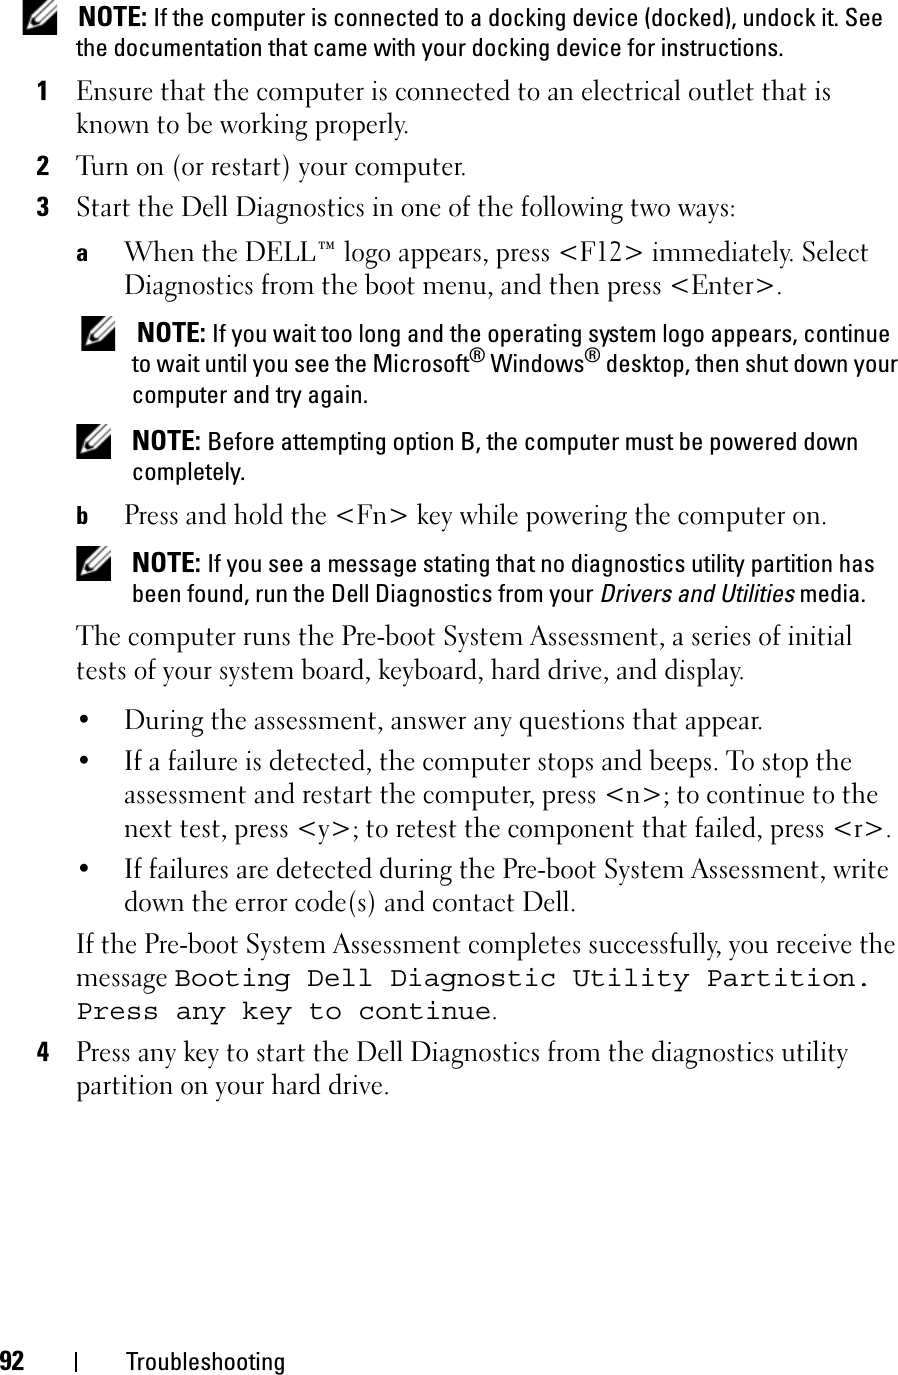 92 TroubleshootingNOTE: If the computer is connected to a docking device (docked), undock it. See the documentation that came with your docking device for instructions.1Ensure that the computer is connected to an electrical outlet that is known to be working properly.2Turn on (or restart) your computer.3Start the Dell Diagnostics in one of the following two ways:aWhen the DELL™ logo appears, press &lt;F12&gt; immediately. Select Diagnostics from the boot menu, and then press &lt;Enter&gt;.NOTE: If you wait too long and the operating system logo appears, continue to wait until you see the Microsoft® Windows® desktop, then shut down your computer and try again.NOTE: Before attempting option B, the computer must be powered down completely.bPress and hold the &lt;Fn&gt; key while powering the computer on.NOTE: If you see a message stating that no diagnostics utility partition has been found, run the Dell Diagnostics from your Drivers and Utilities media.The computer runs the Pre-boot System Assessment, a series of initial tests of your system board, keyboard, hard drive, and display.• During the assessment, answer any questions that appear.• If a failure is detected, the computer stops and beeps. To stop the assessment and restart the computer, press &lt;n&gt;; to continue to the next test, press &lt;y&gt;; to retest the component that failed, press &lt;r&gt;. • If failures are detected during the Pre-boot System Assessment, write down the error code(s) and contact Dell.If the Pre-boot System Assessment completes successfully, you receive the messageBooting Dell Diagnostic Utility Partition. Press any key to continue.4Press any key to start the Dell Diagnostics from the diagnostics utility partition on your hard drive.